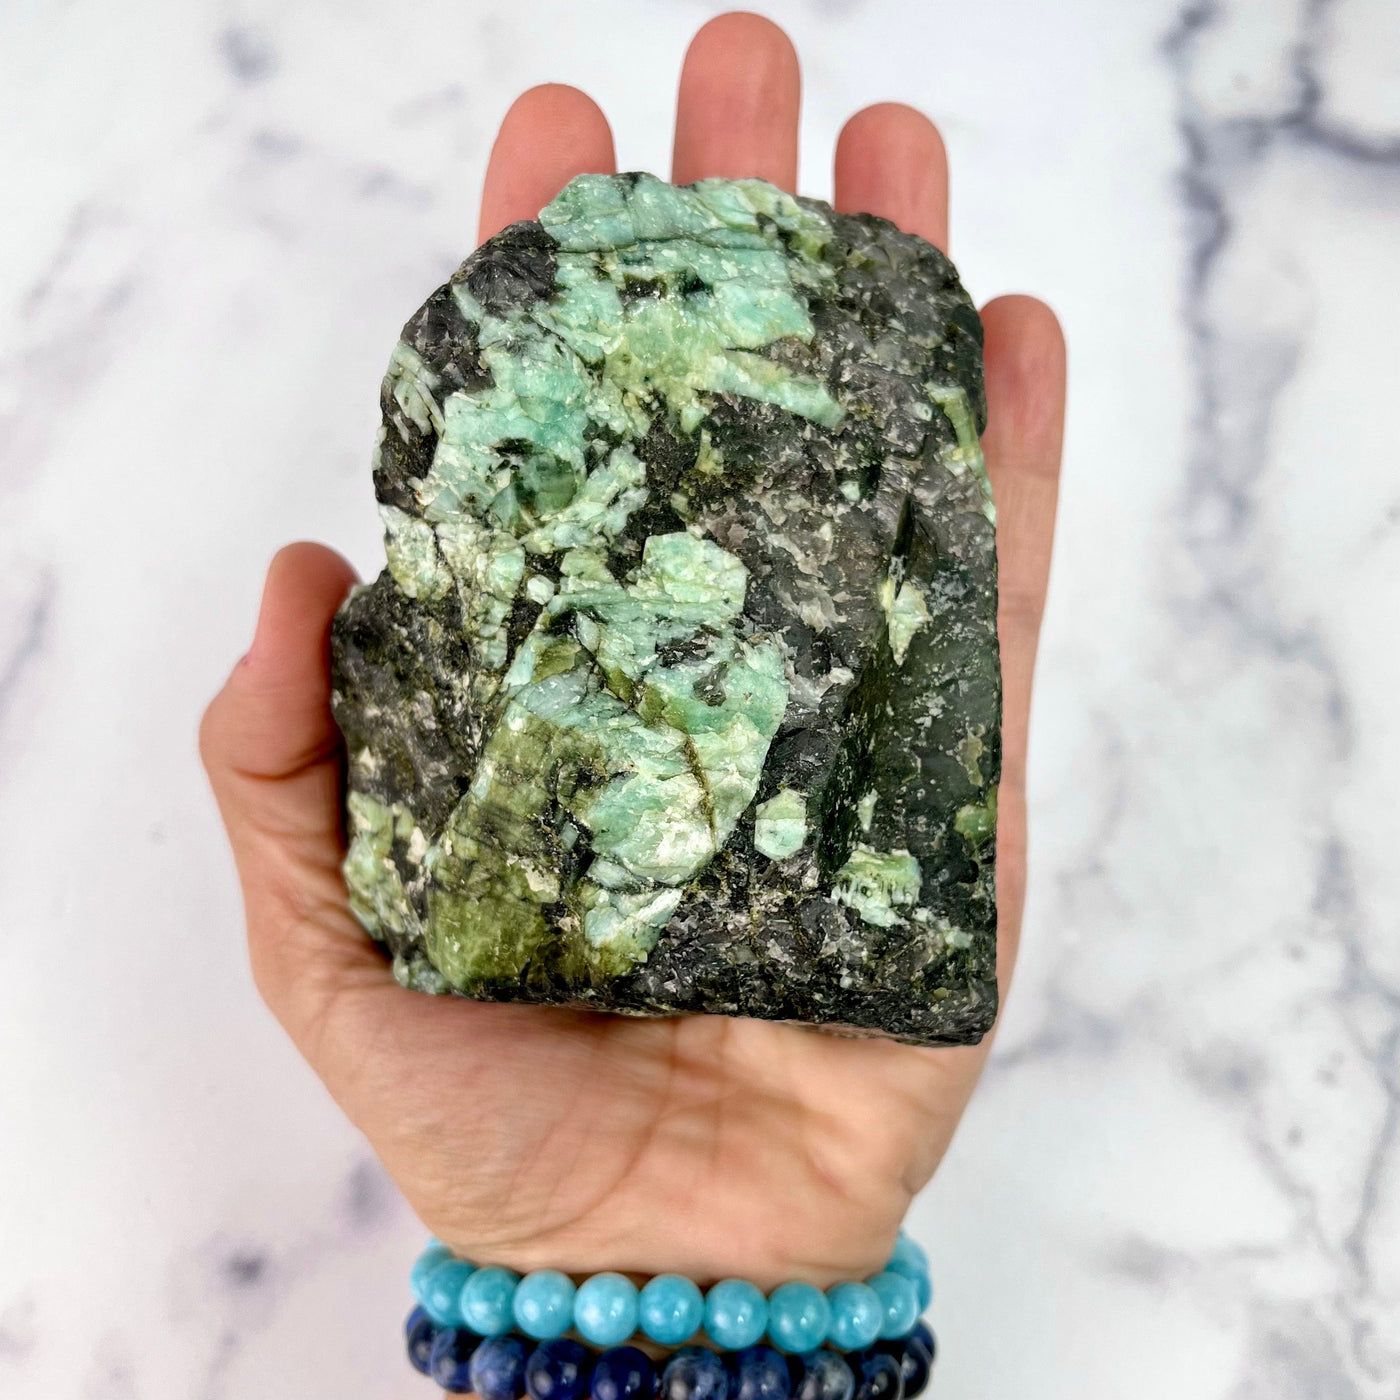 Rough Emerald Matrix stone "A" in the palm of woman's hand for size reference.